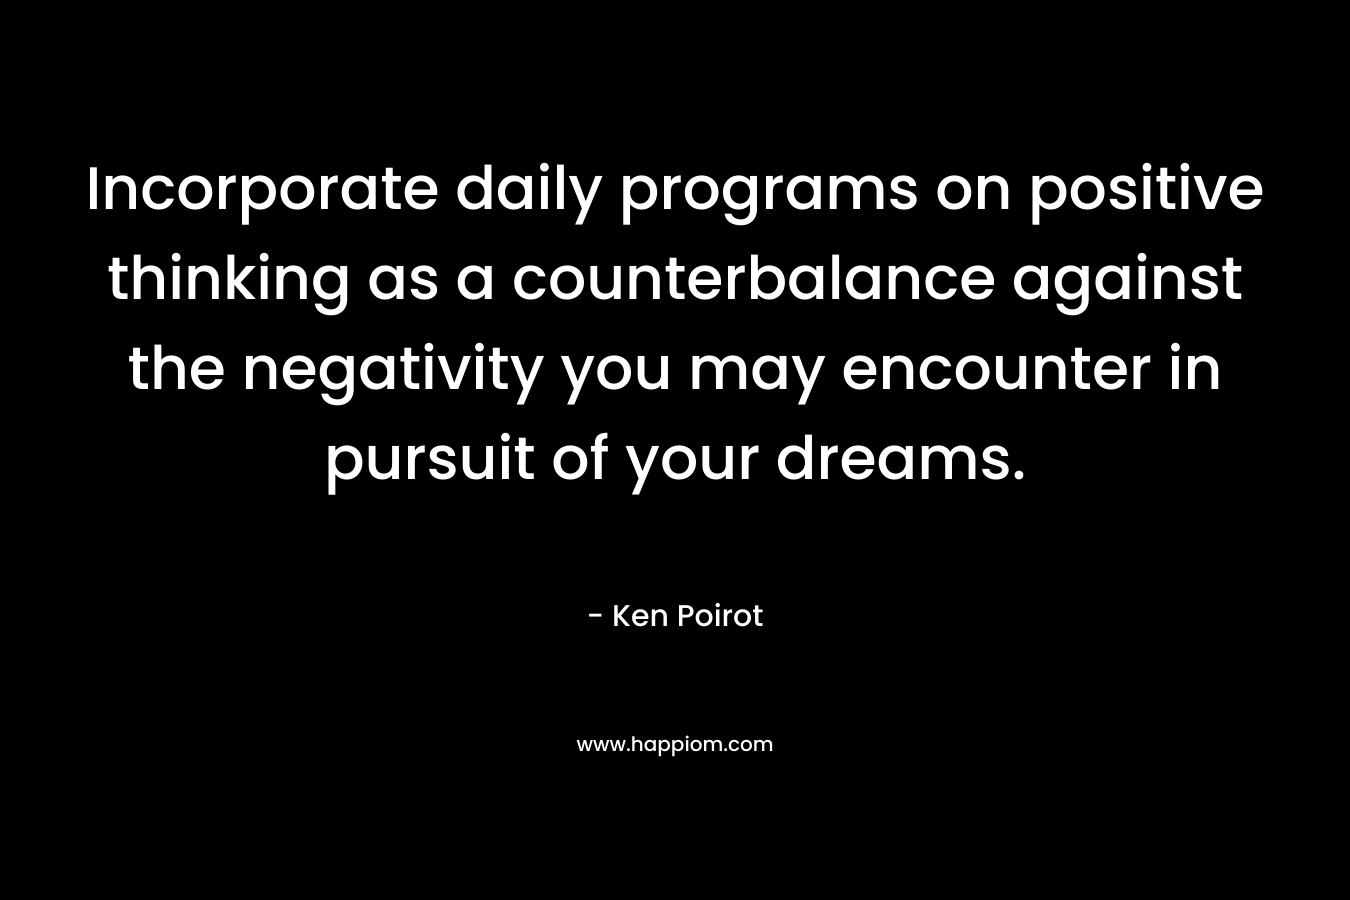 Incorporate daily programs on positive thinking as a counterbalance against the negativity you may encounter in pursuit of your dreams. – Ken Poirot